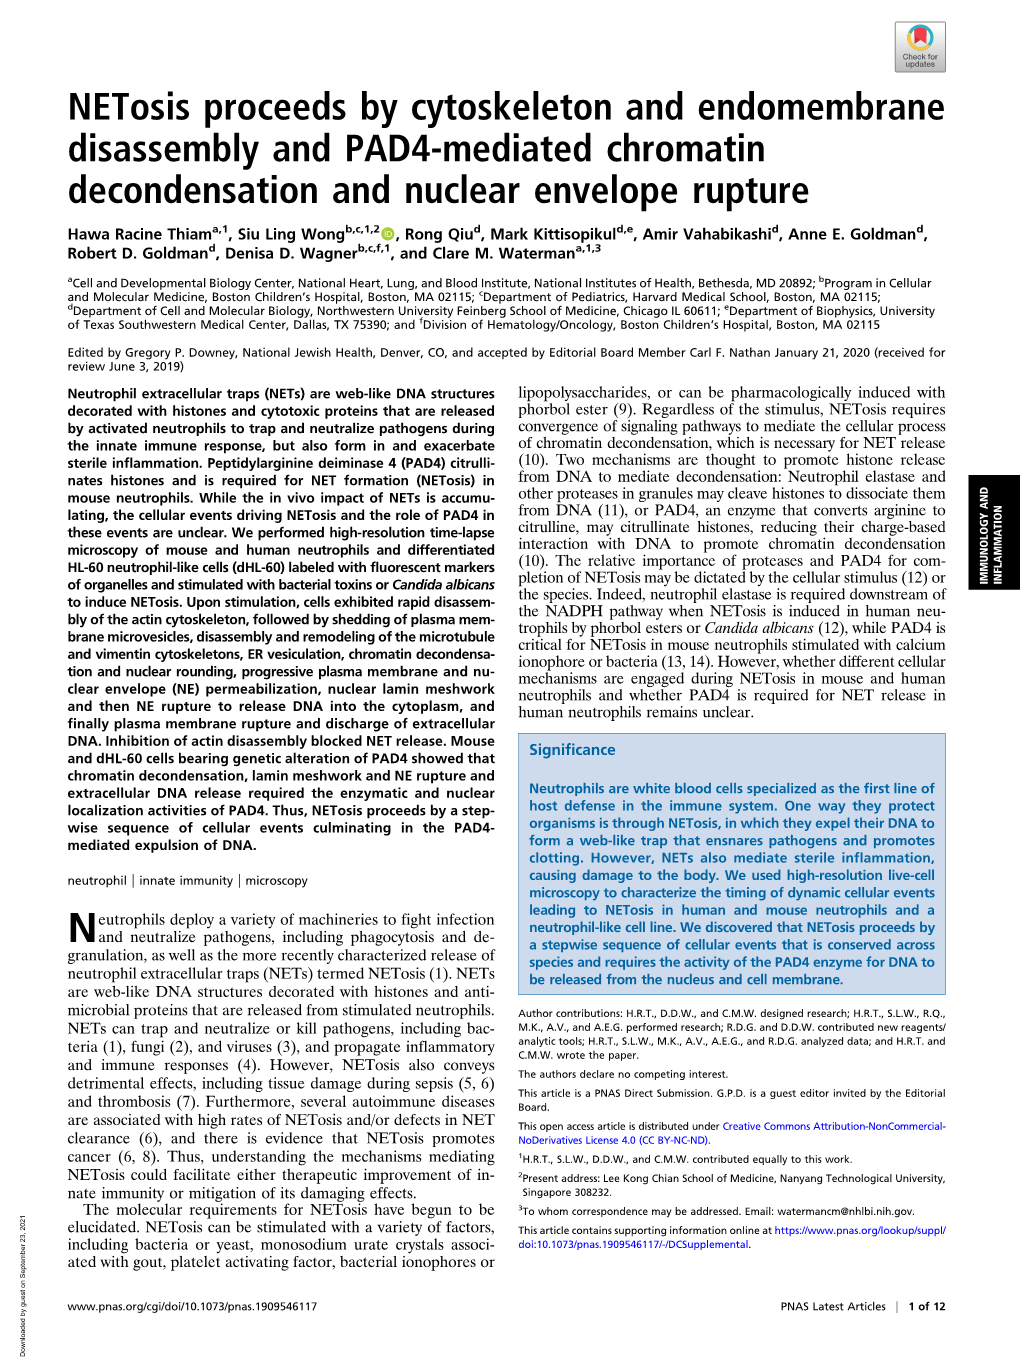 Netosis Proceeds by Cytoskeleton and Endomembrane Disassembly and PAD4-Mediated Chromatin Decondensation and Nuclear Envelope Rupture